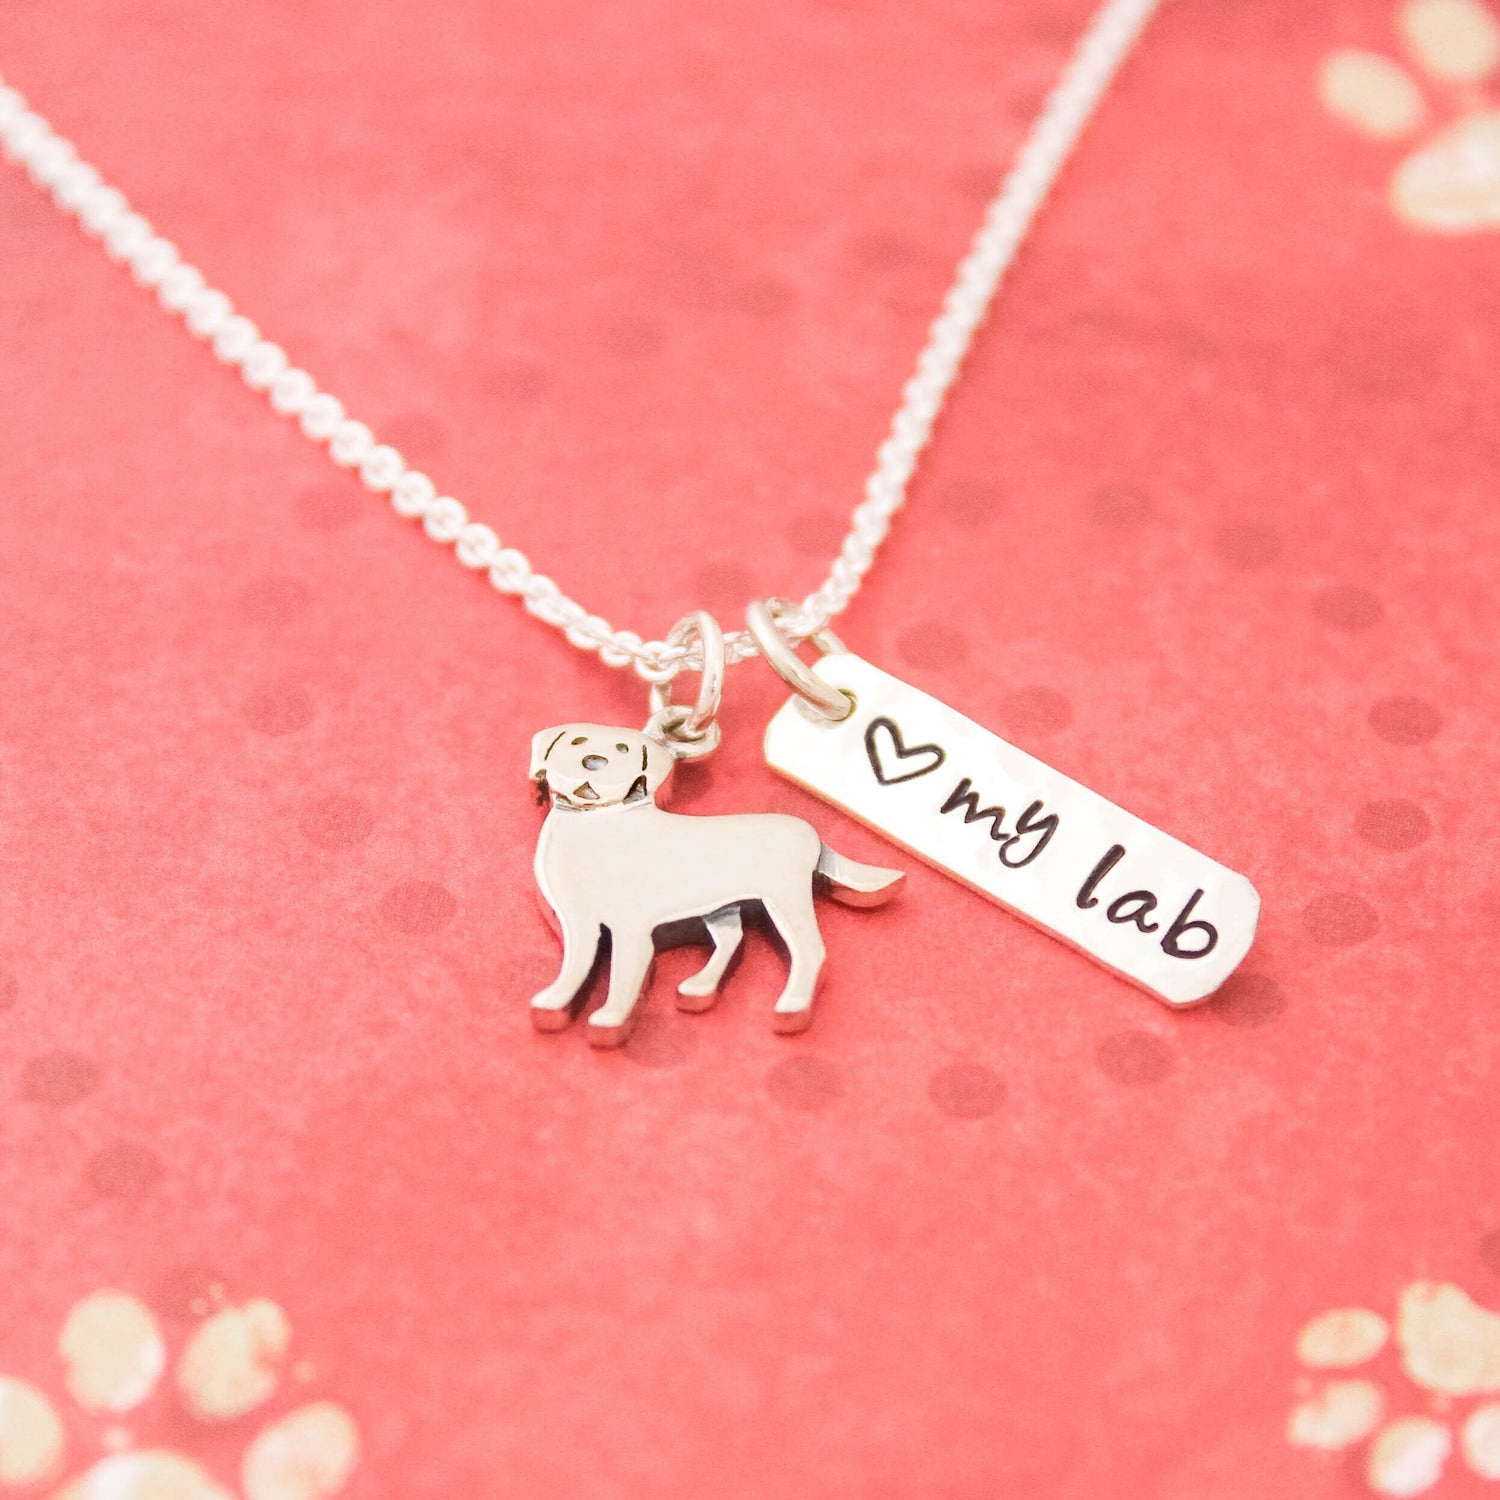 LOVE my LAB Necklace, Sterling Silver Labrador Dog Necklace, Lab Lover Gift, New Pet Gift, Labrador Retriever Jewelry, Hand Stamped Lab Gift